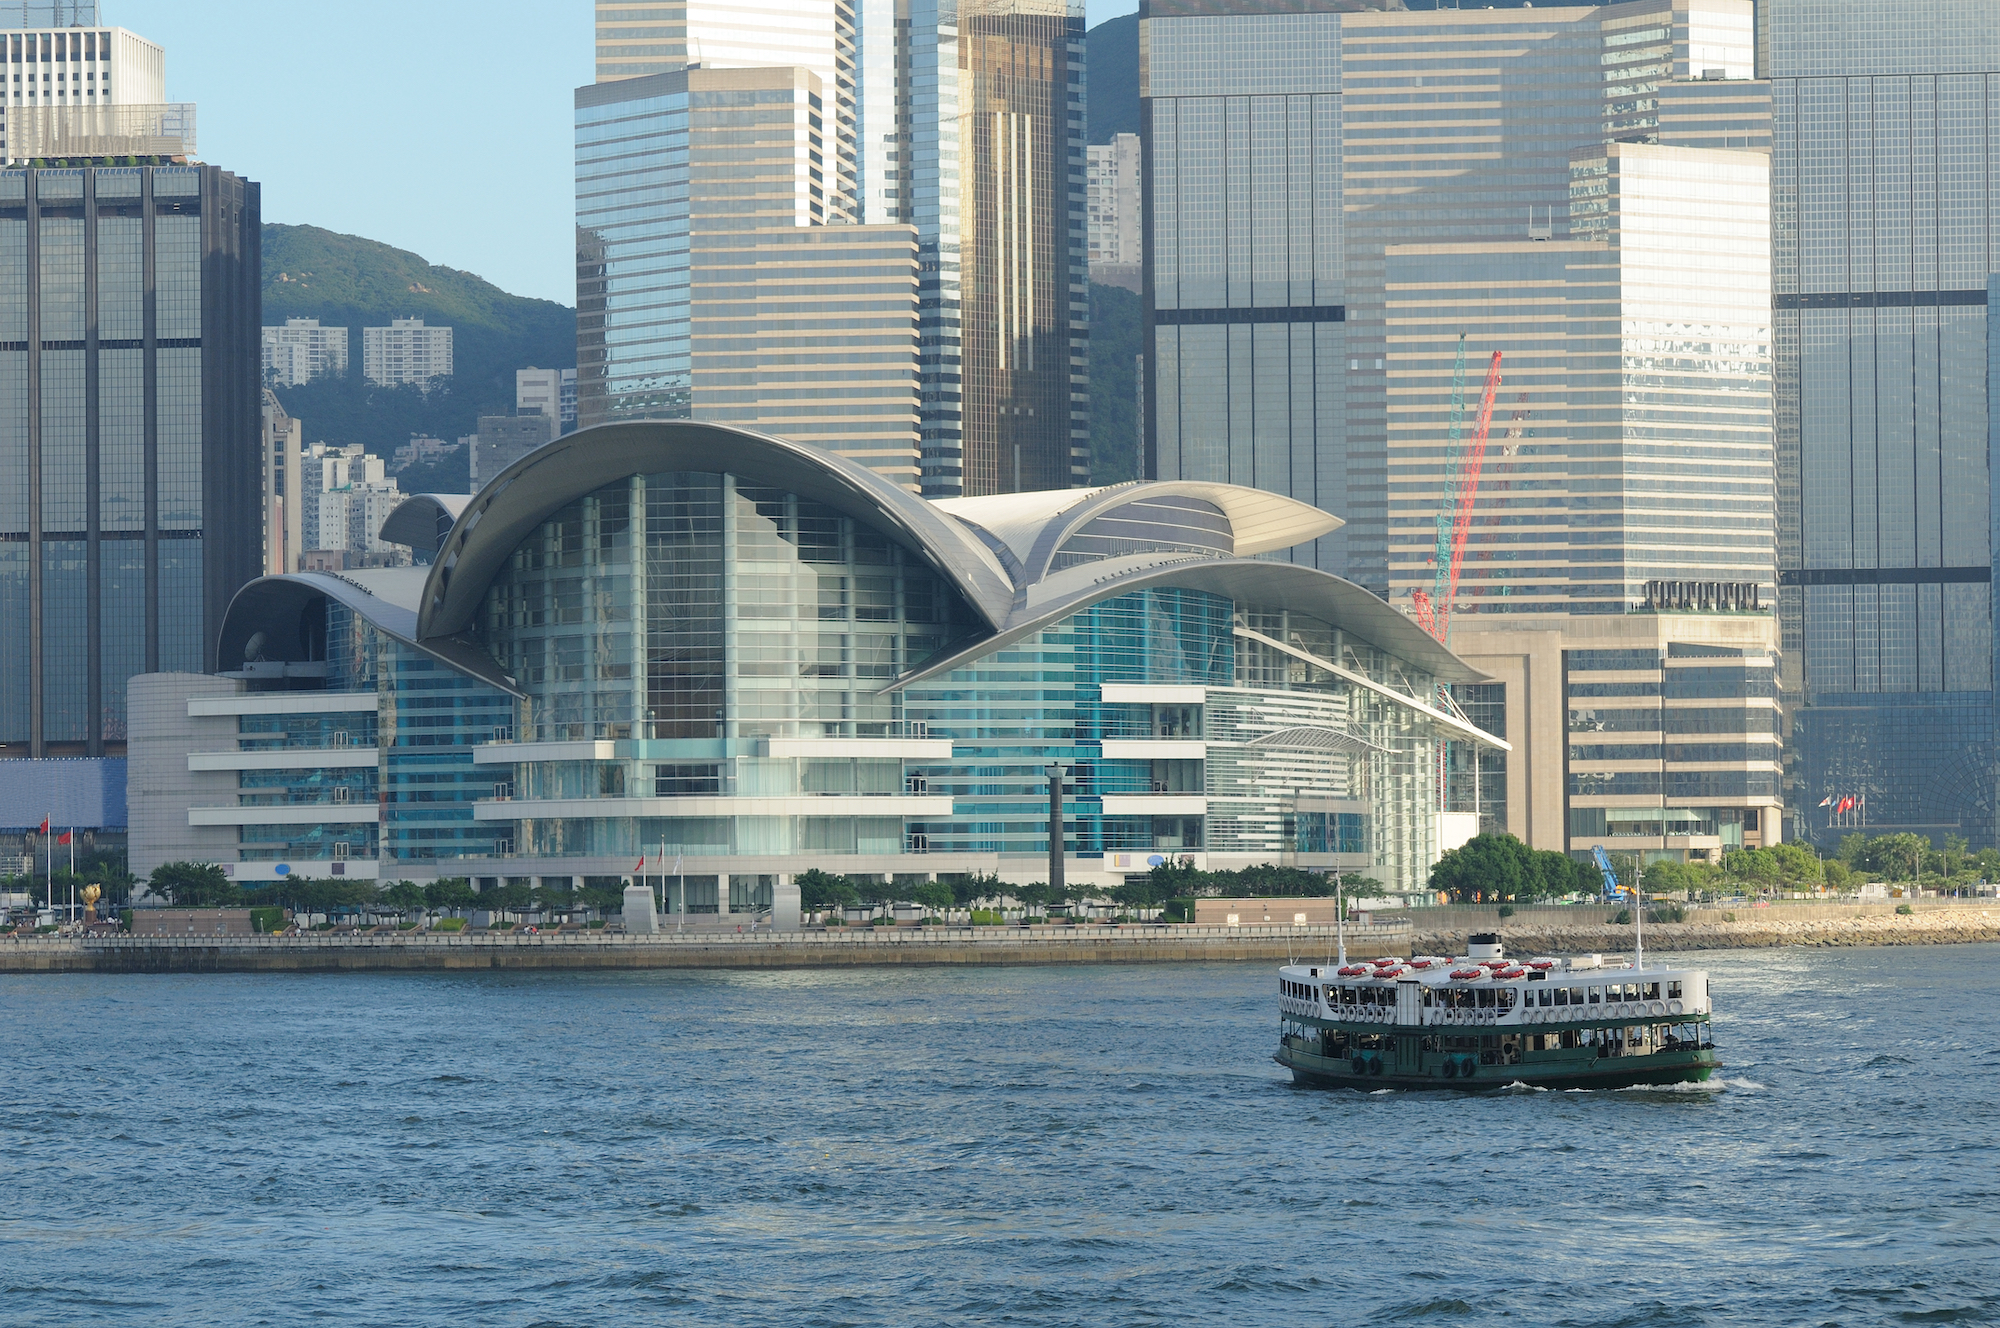 Hong Kong is back in the game as a MICE destination